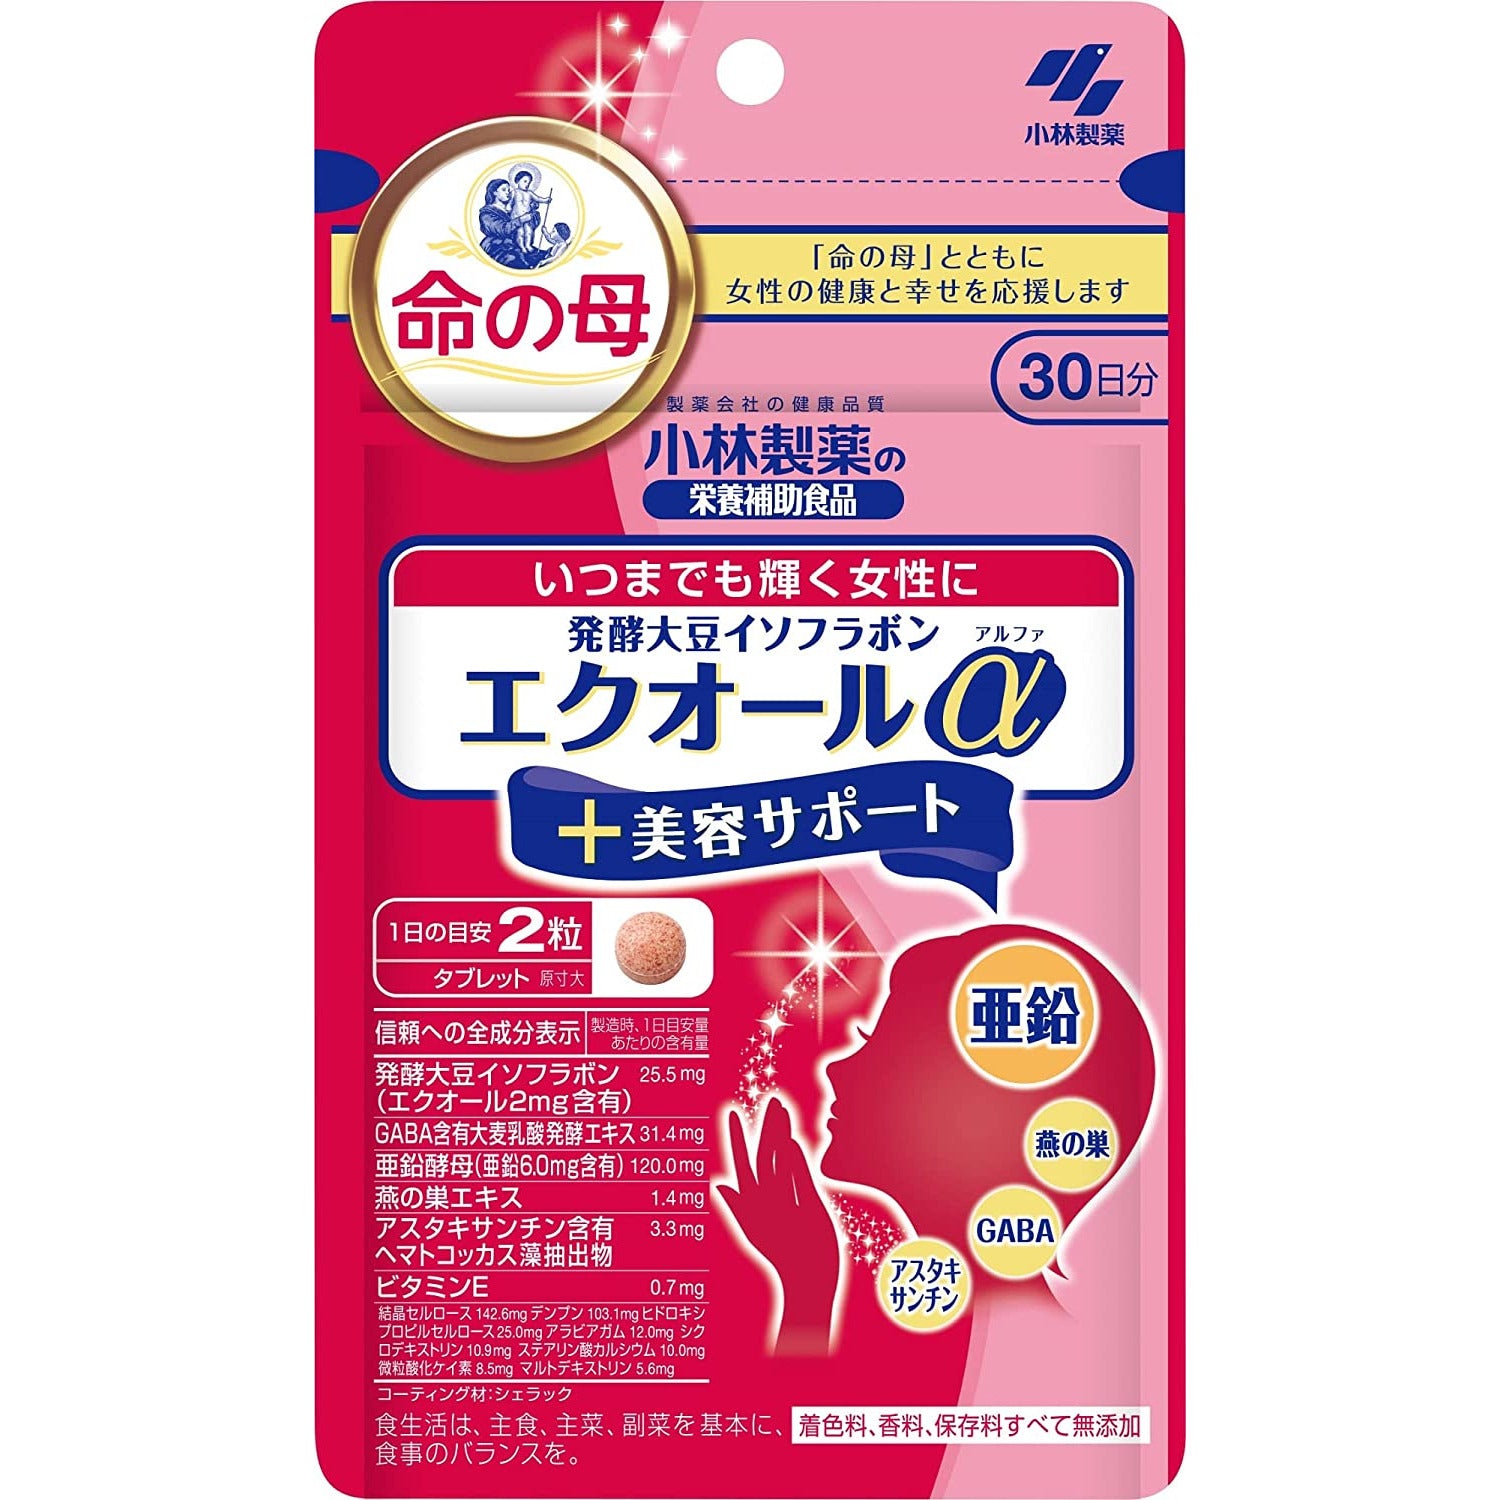 Kobayashi Supplement Equol α Plus Beauty Support Zinc Swallow's Nest Extract Astaxanthin 60 Tablets 30 Days